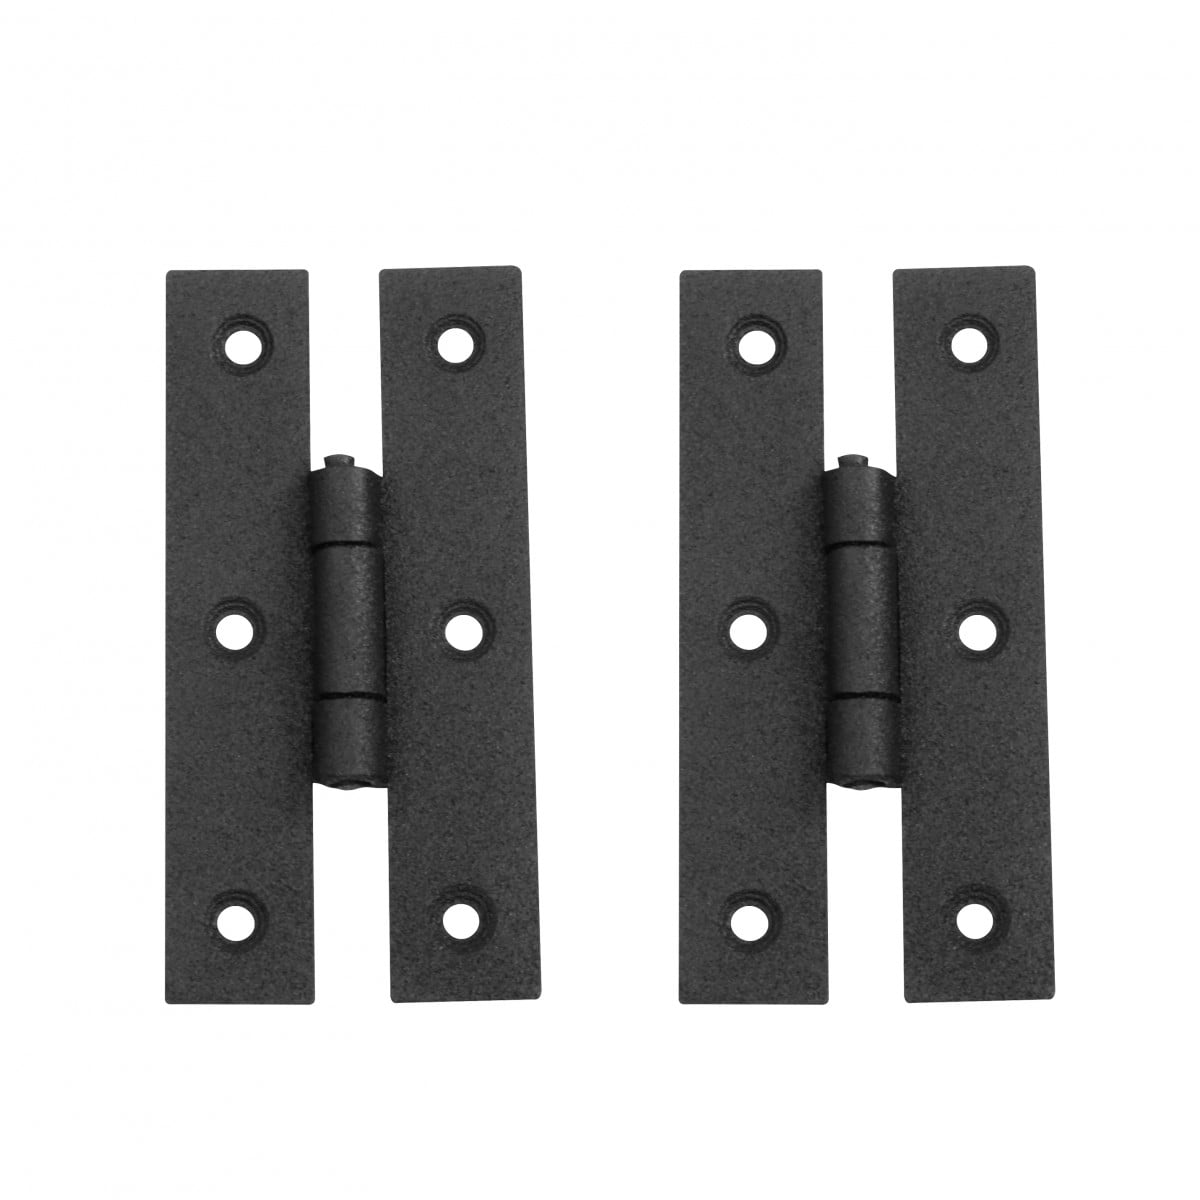 Wrought Iron Door Gate Hinge 5 3/8 Hardware Included Renovators Supply Manufacturing 